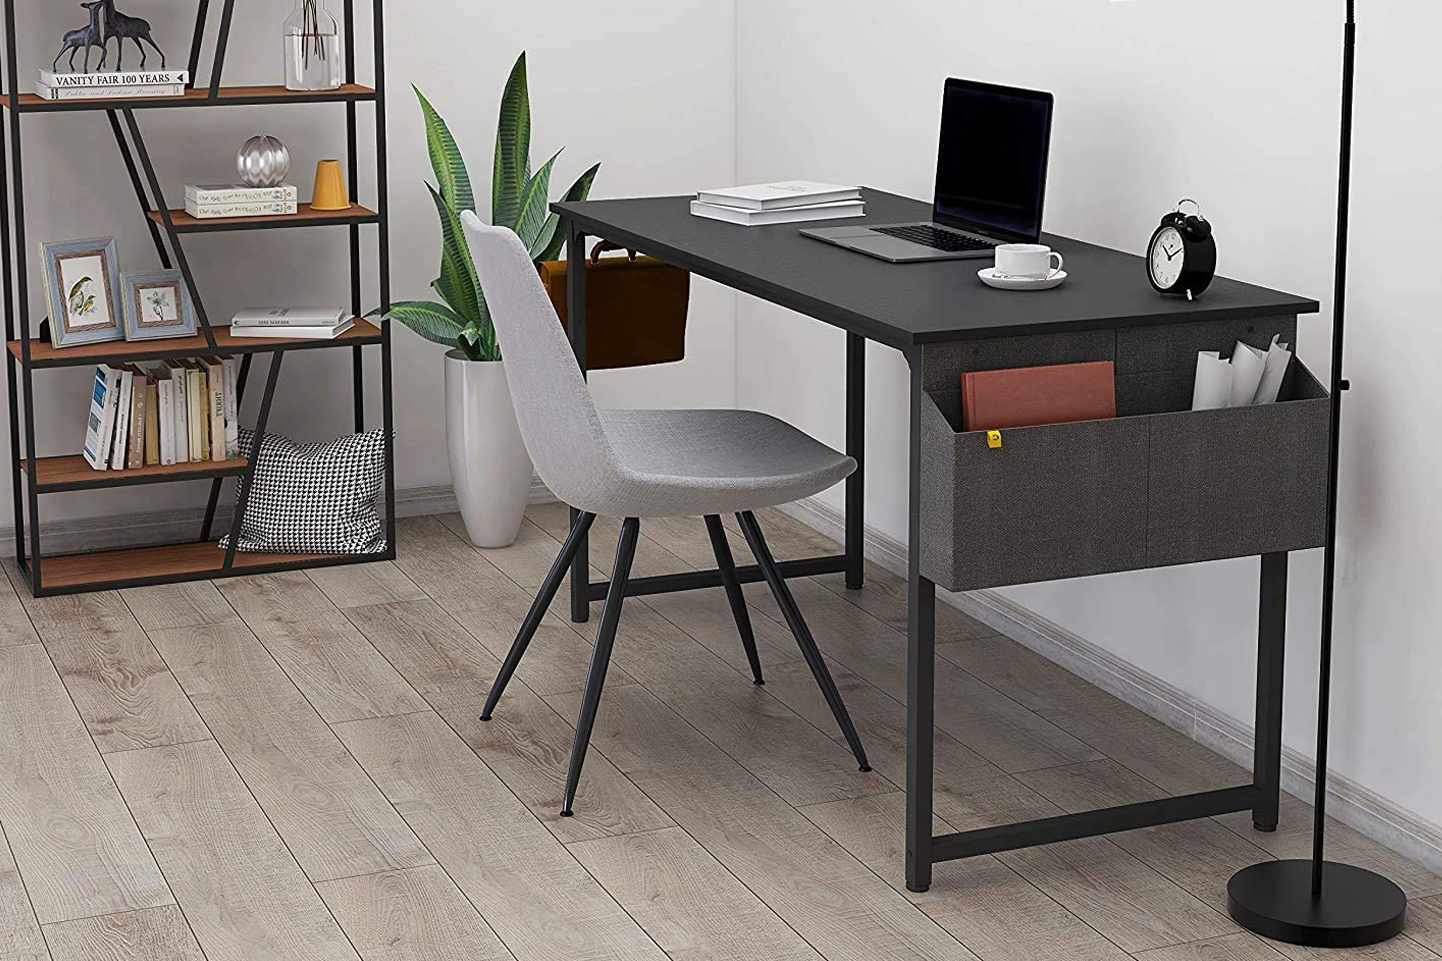 Amazon's Best-Selling Home Office Desk Is Less Than $60 | PEOPLE.com